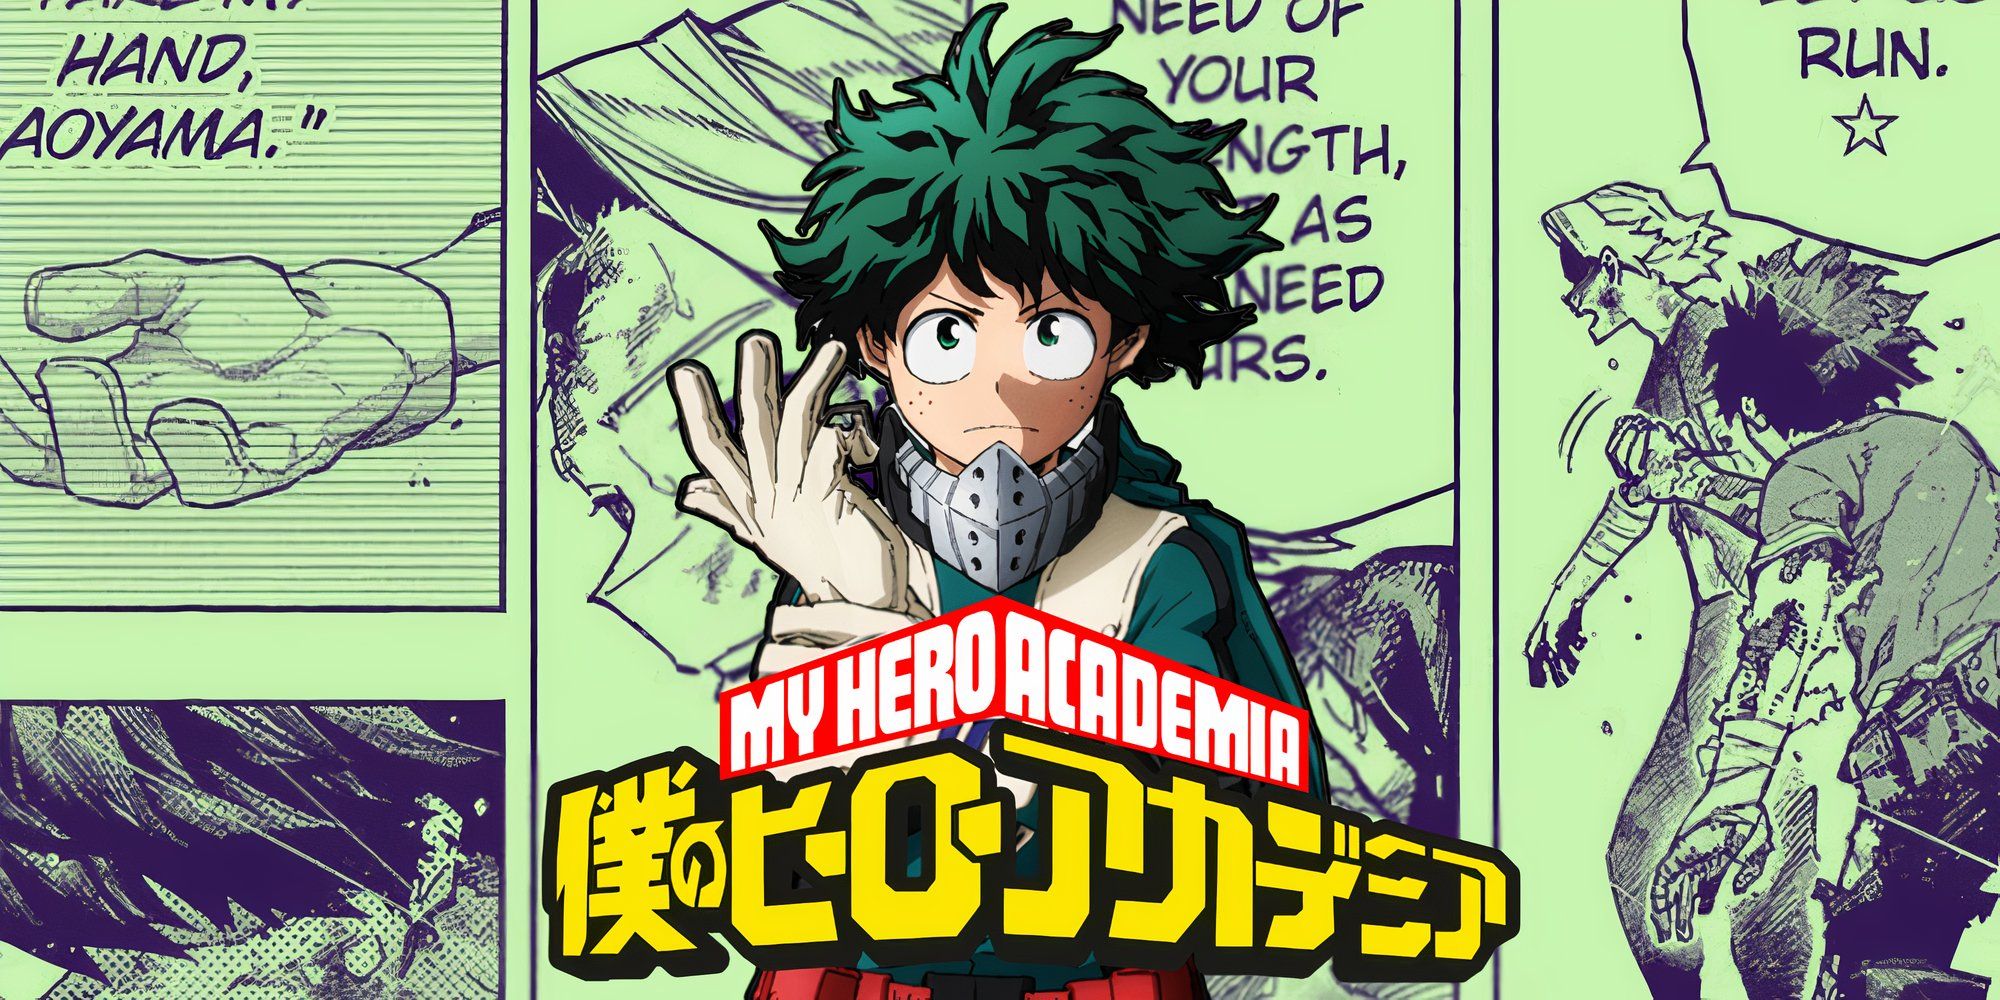 Deku with the title page of Chapter 422 of the MHA manga in the background